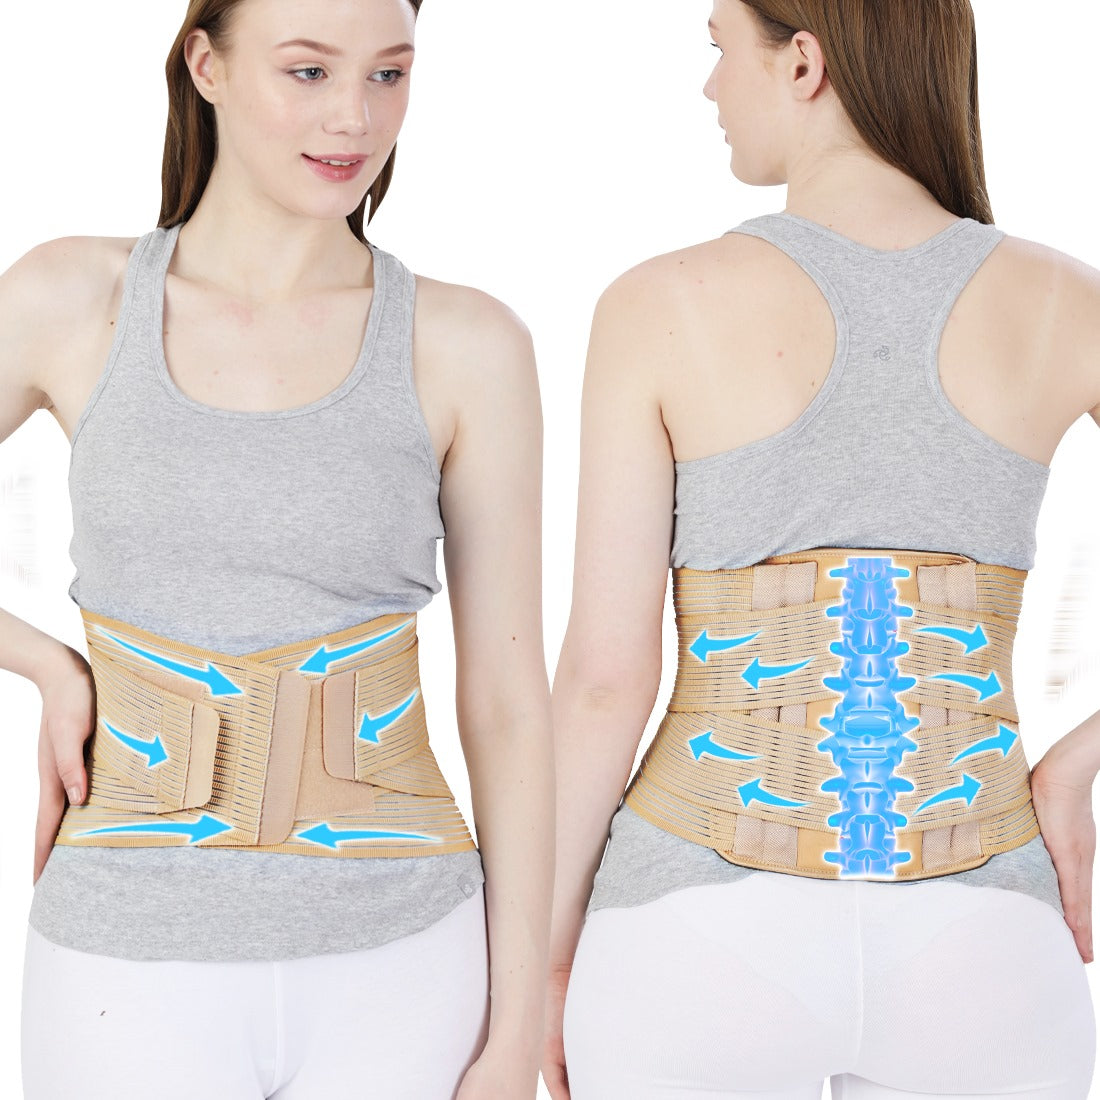 Ergonomic Posture Corrector - Adjustable Back Brace for Pain Relief, Stand  Tall